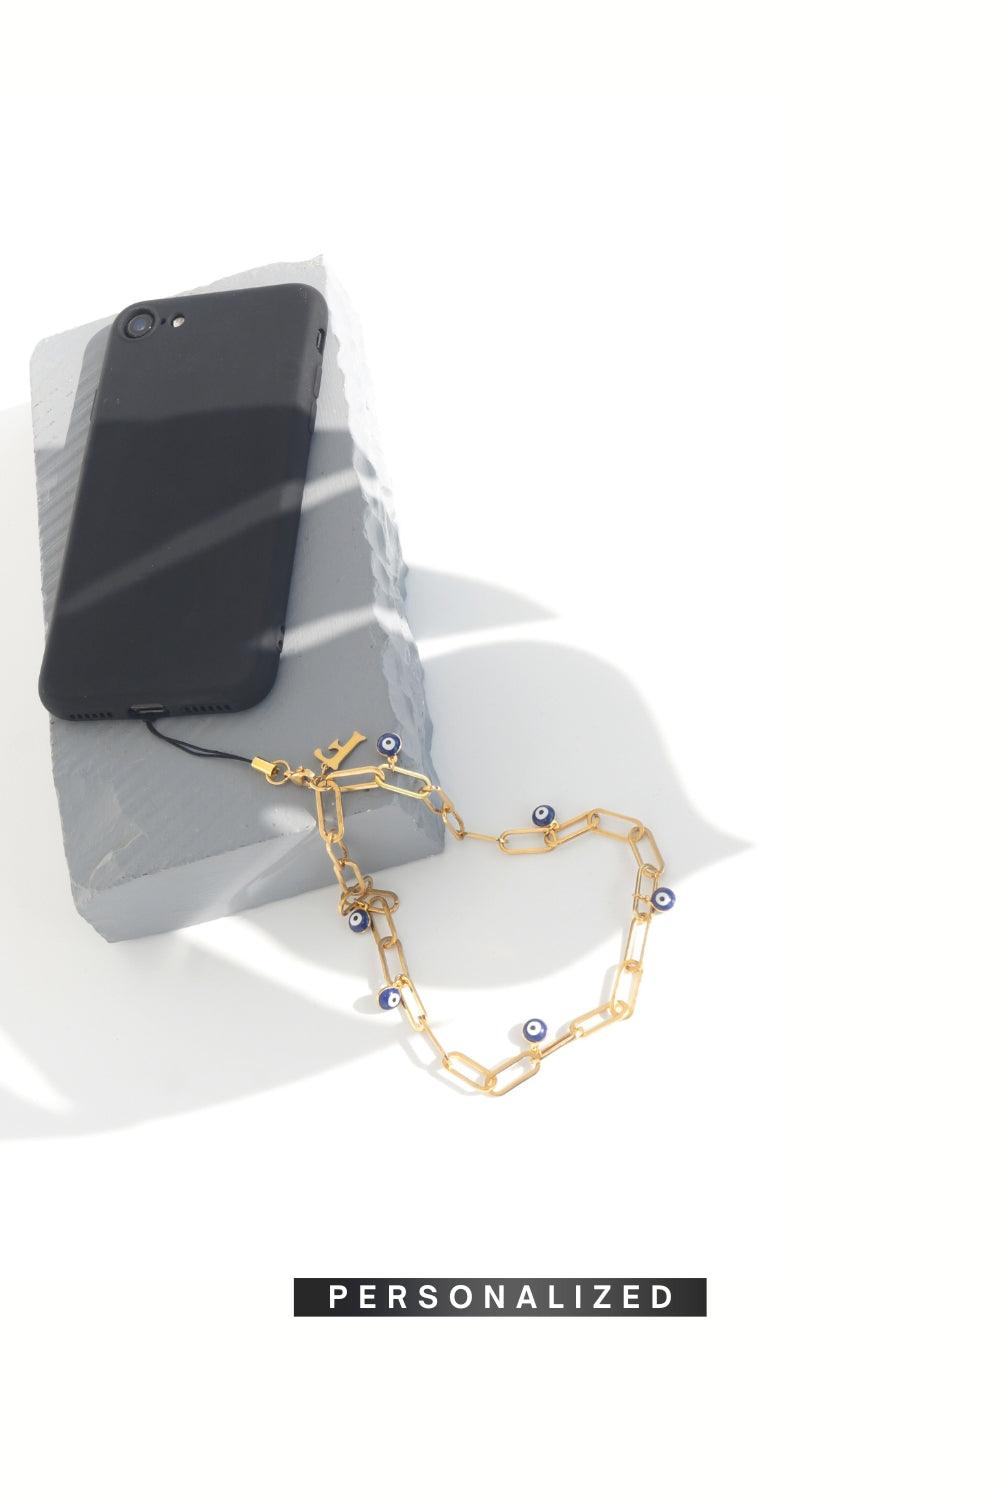 KEEP AN EYE - GOLD Personalized Phone Chain | SPECSET